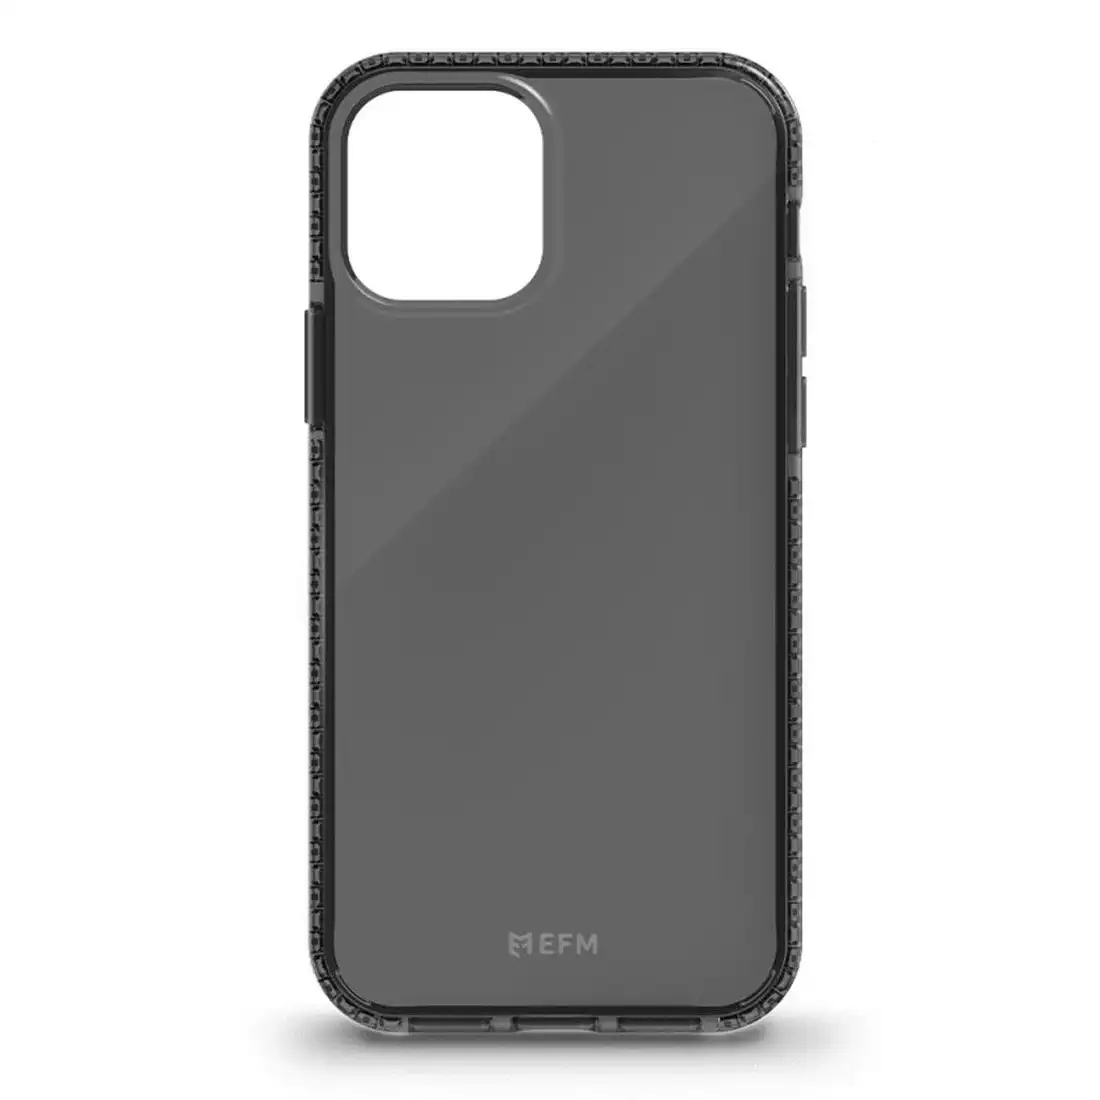 EFM Zurich Case Armour Protection For iPhone 12/12 Pro  - Smoke Black